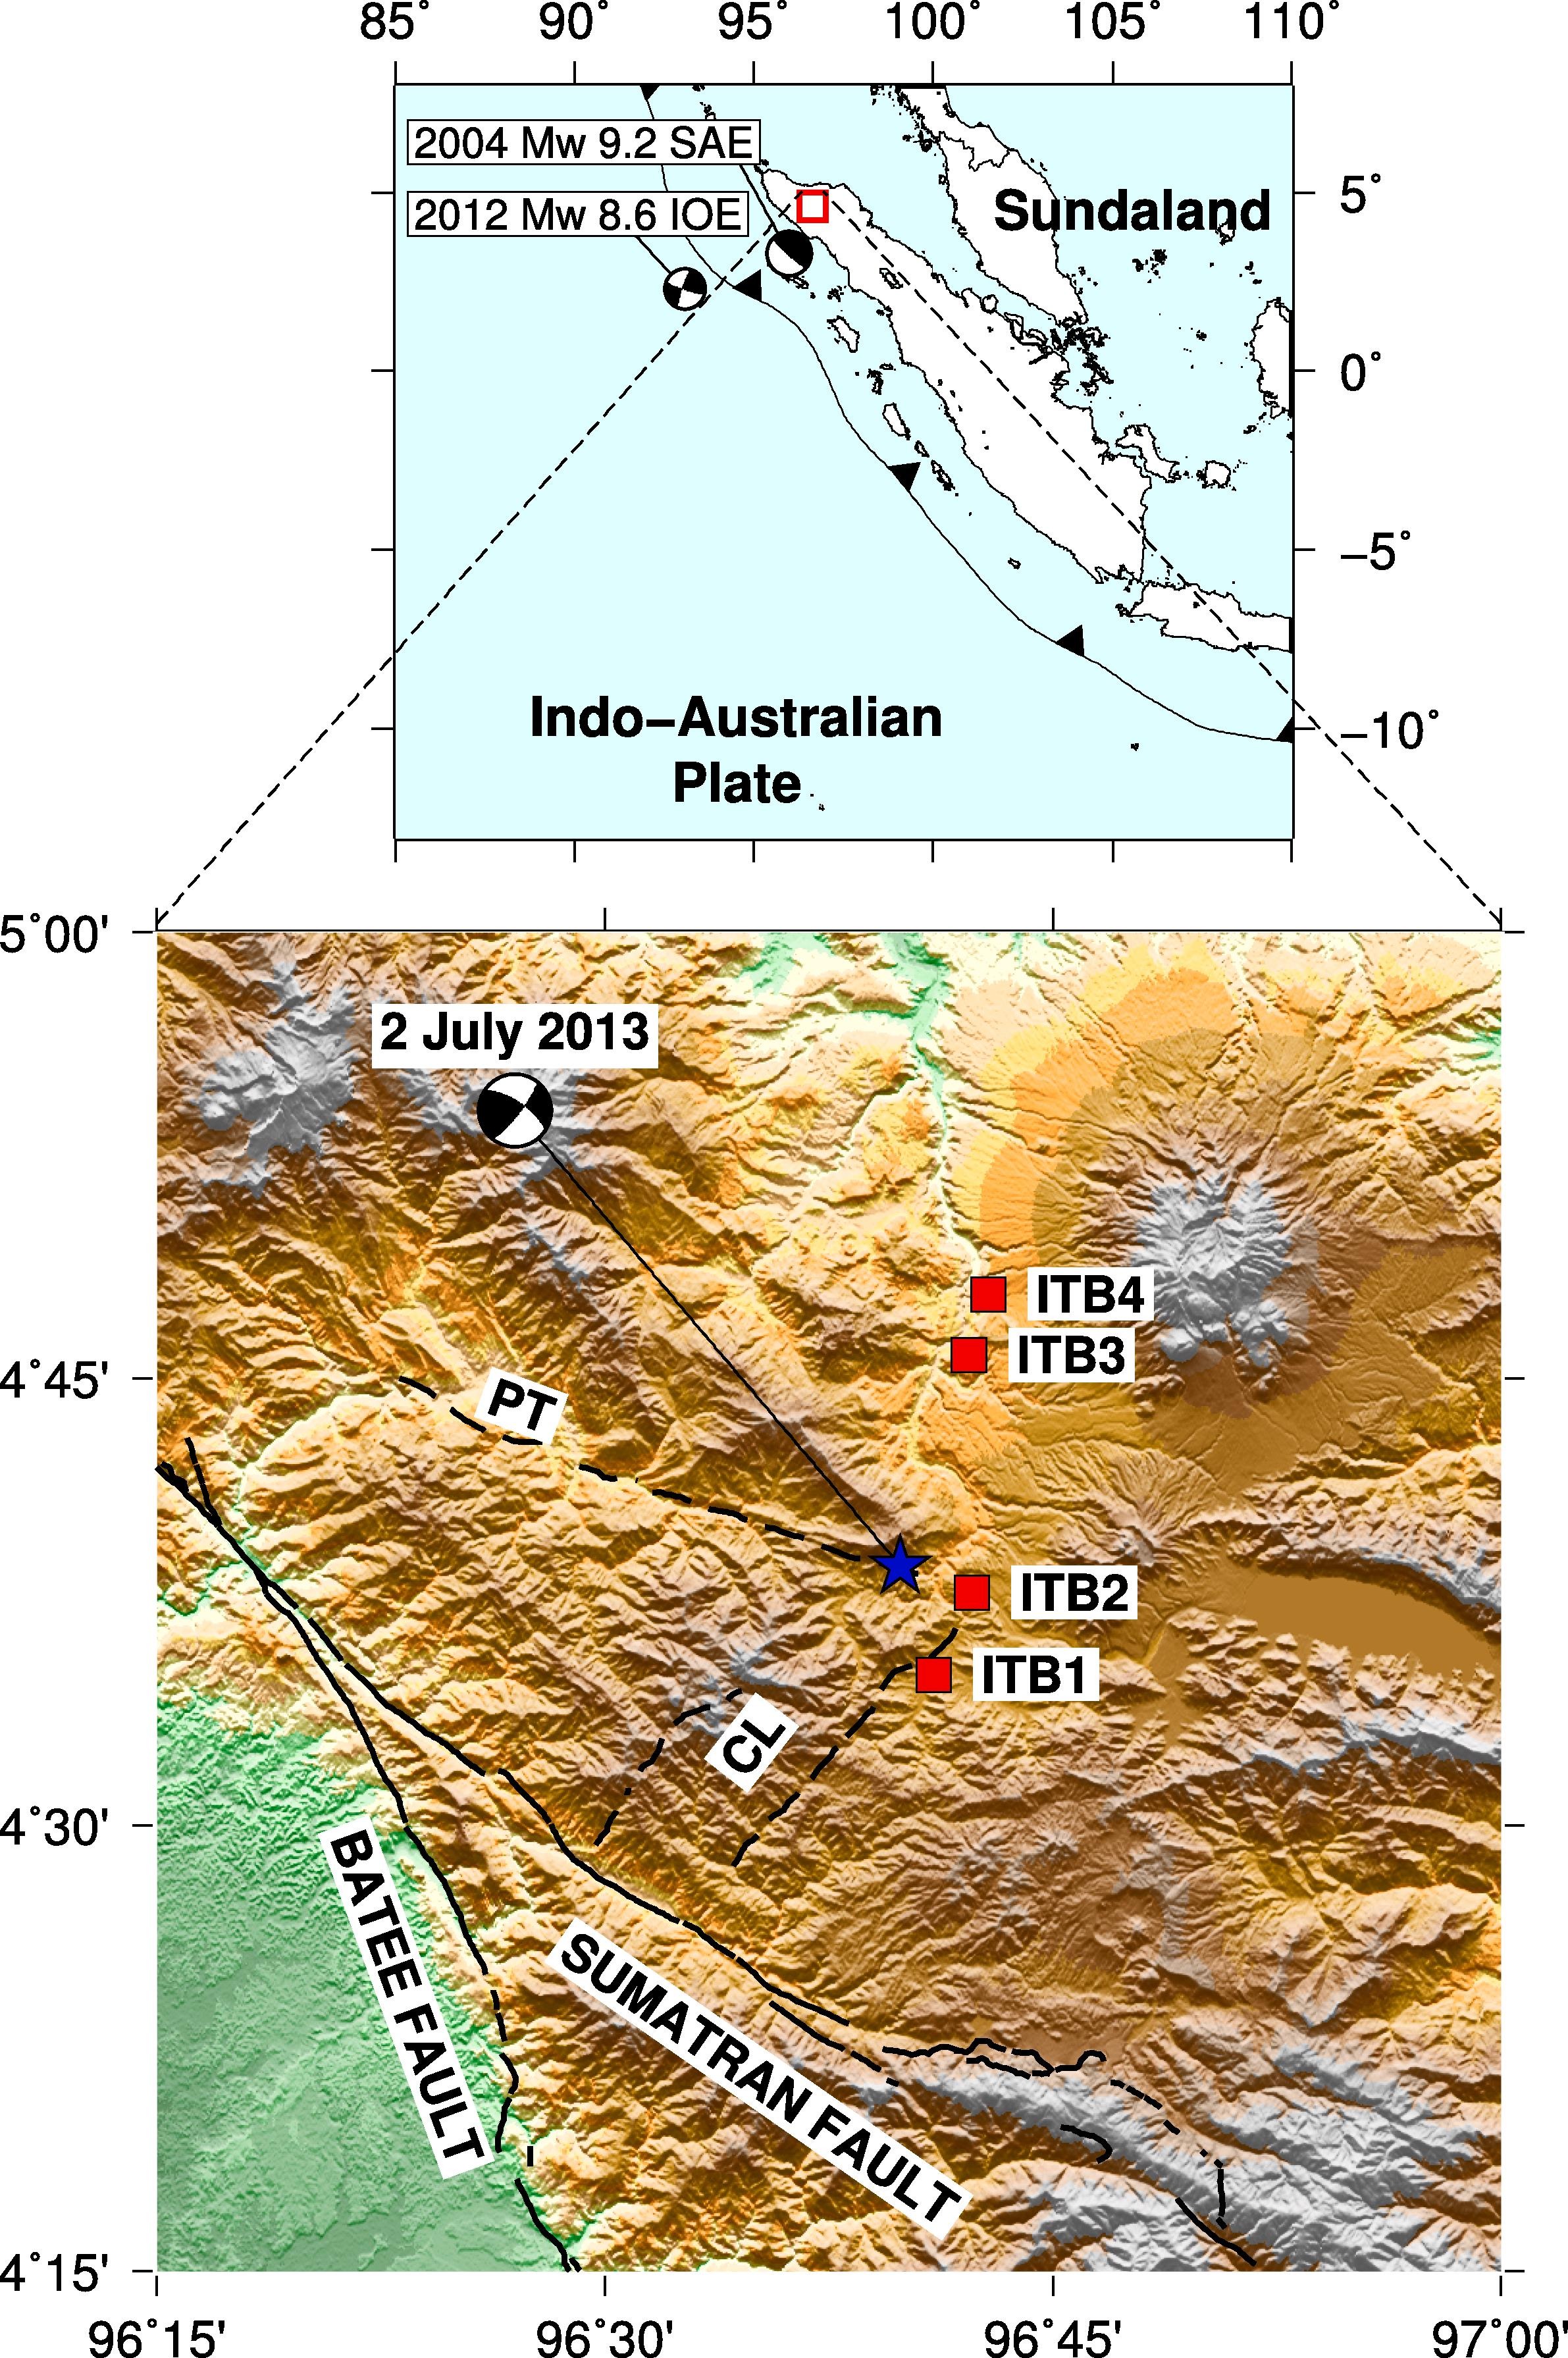 Fig. 1. Tectonic setting of this study. The blue star indicates the epicenter of the 2 July 2013 AE based on the United States Geological Survey catalog. The red squares indicate GPS stations, while the solid black lines suggest the locations of the identified Sumatran and Batee faults (Sieh and Natawidjaja, 2000). The dashed line marks the newly identified fault segments of Pantan Terong (PT) and Celala (CL). Topography created using Shuttle Radar Topography Mission (SRTM) 90 m (Jarvis et al., 2008). The inset shows the global map and the epicenter of the 2004 SAE and 2012 IOE. (For interpretation of the references to color in this figure legend, the reader is referred to the web version of this article.)